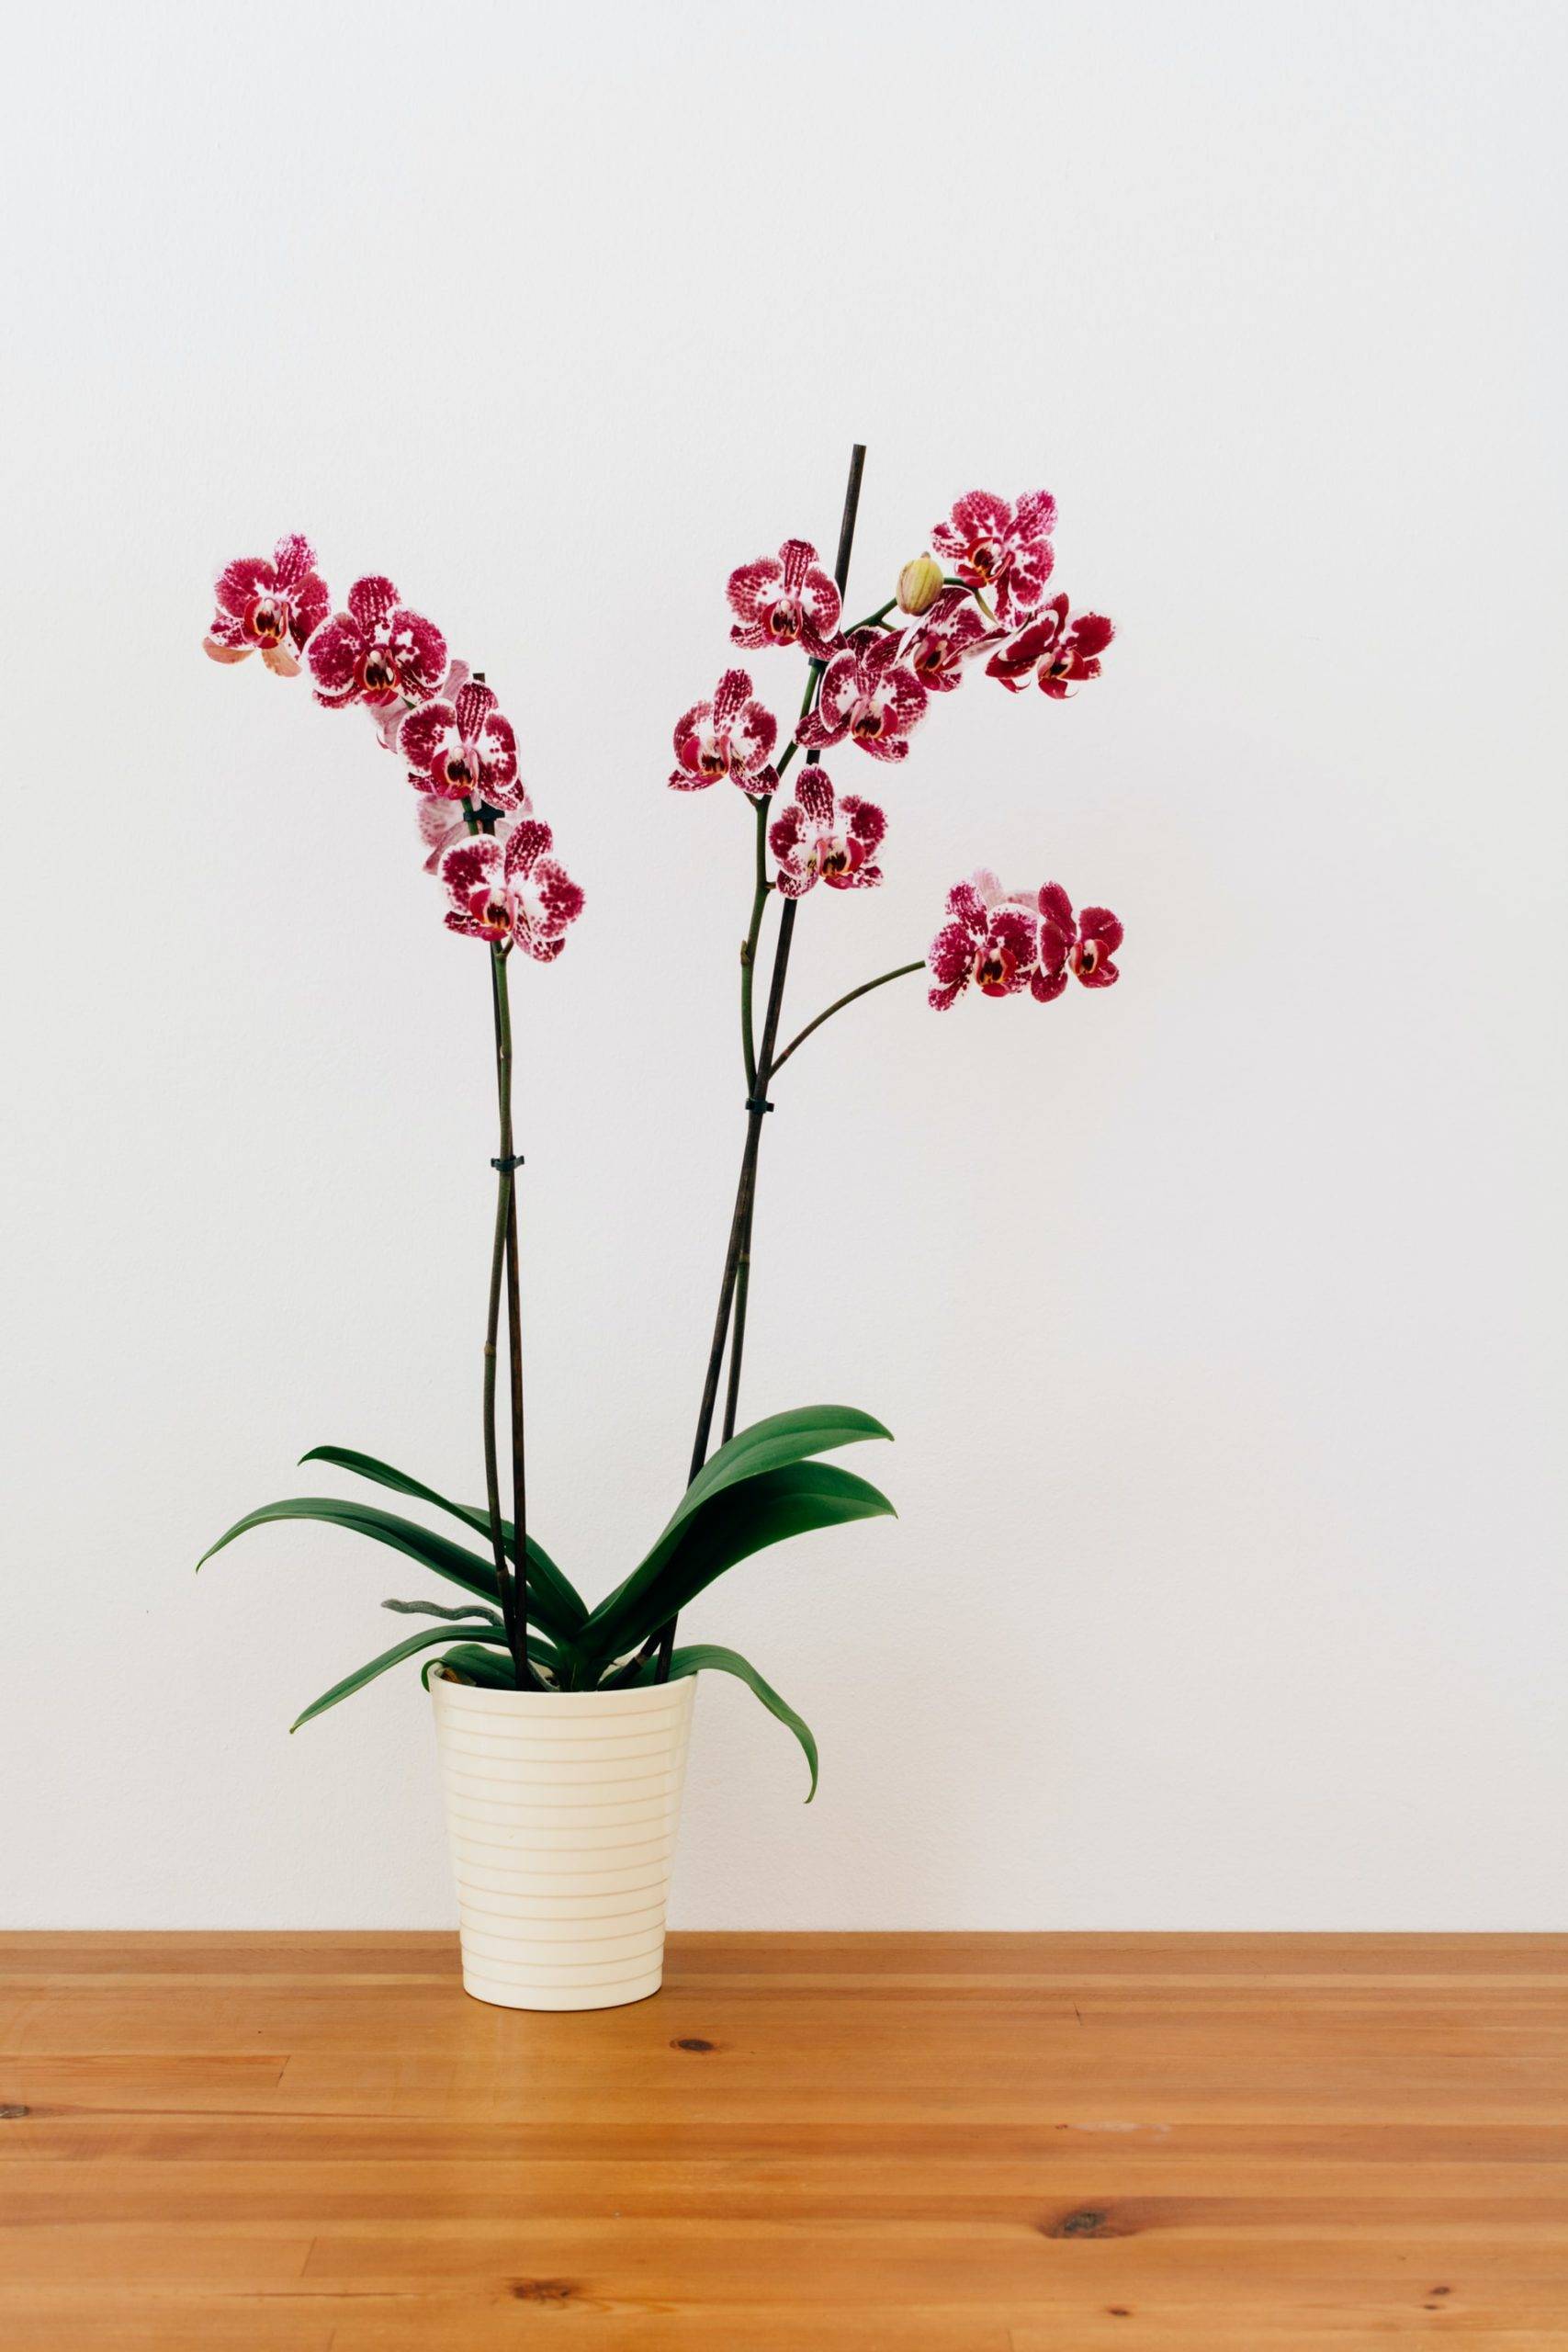 The gorgeous orchid is ideal for the bedroom (from Unsplash)